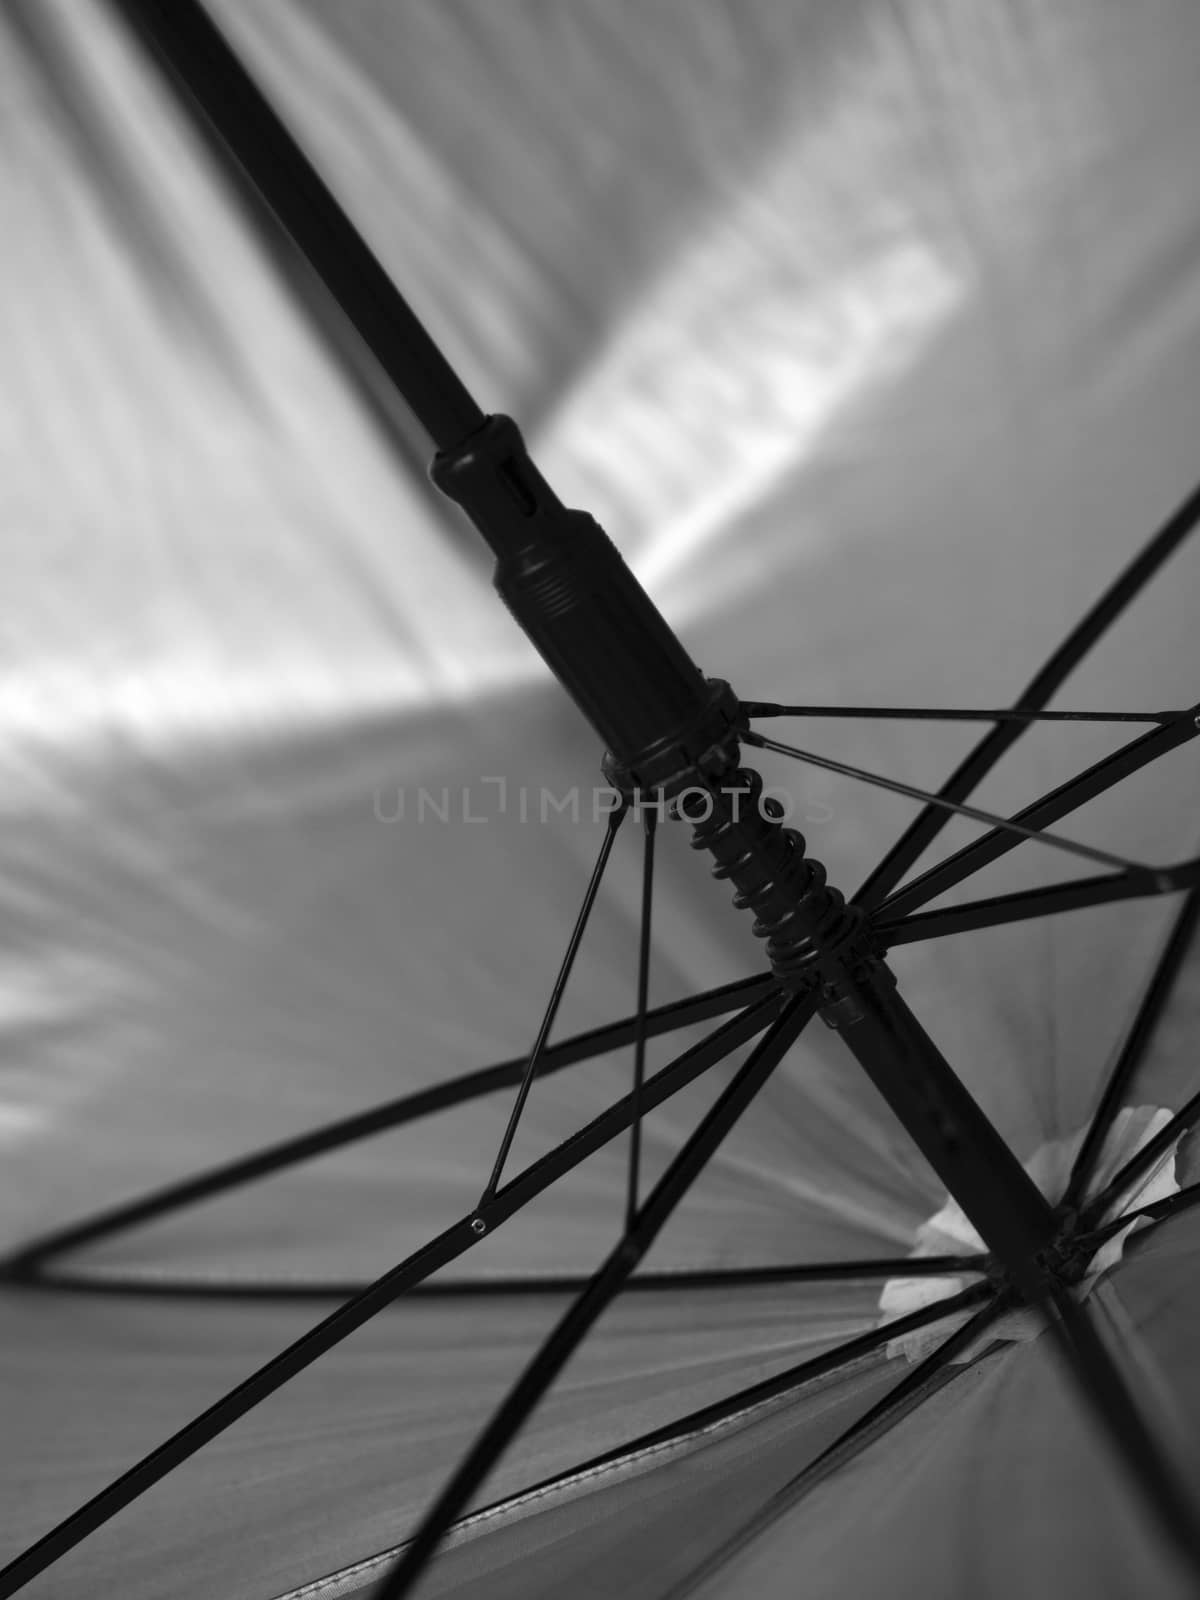 BLACK AND WHITE PHOTO OF ABSTRACT SHOT OF UMBRELLA FRAME